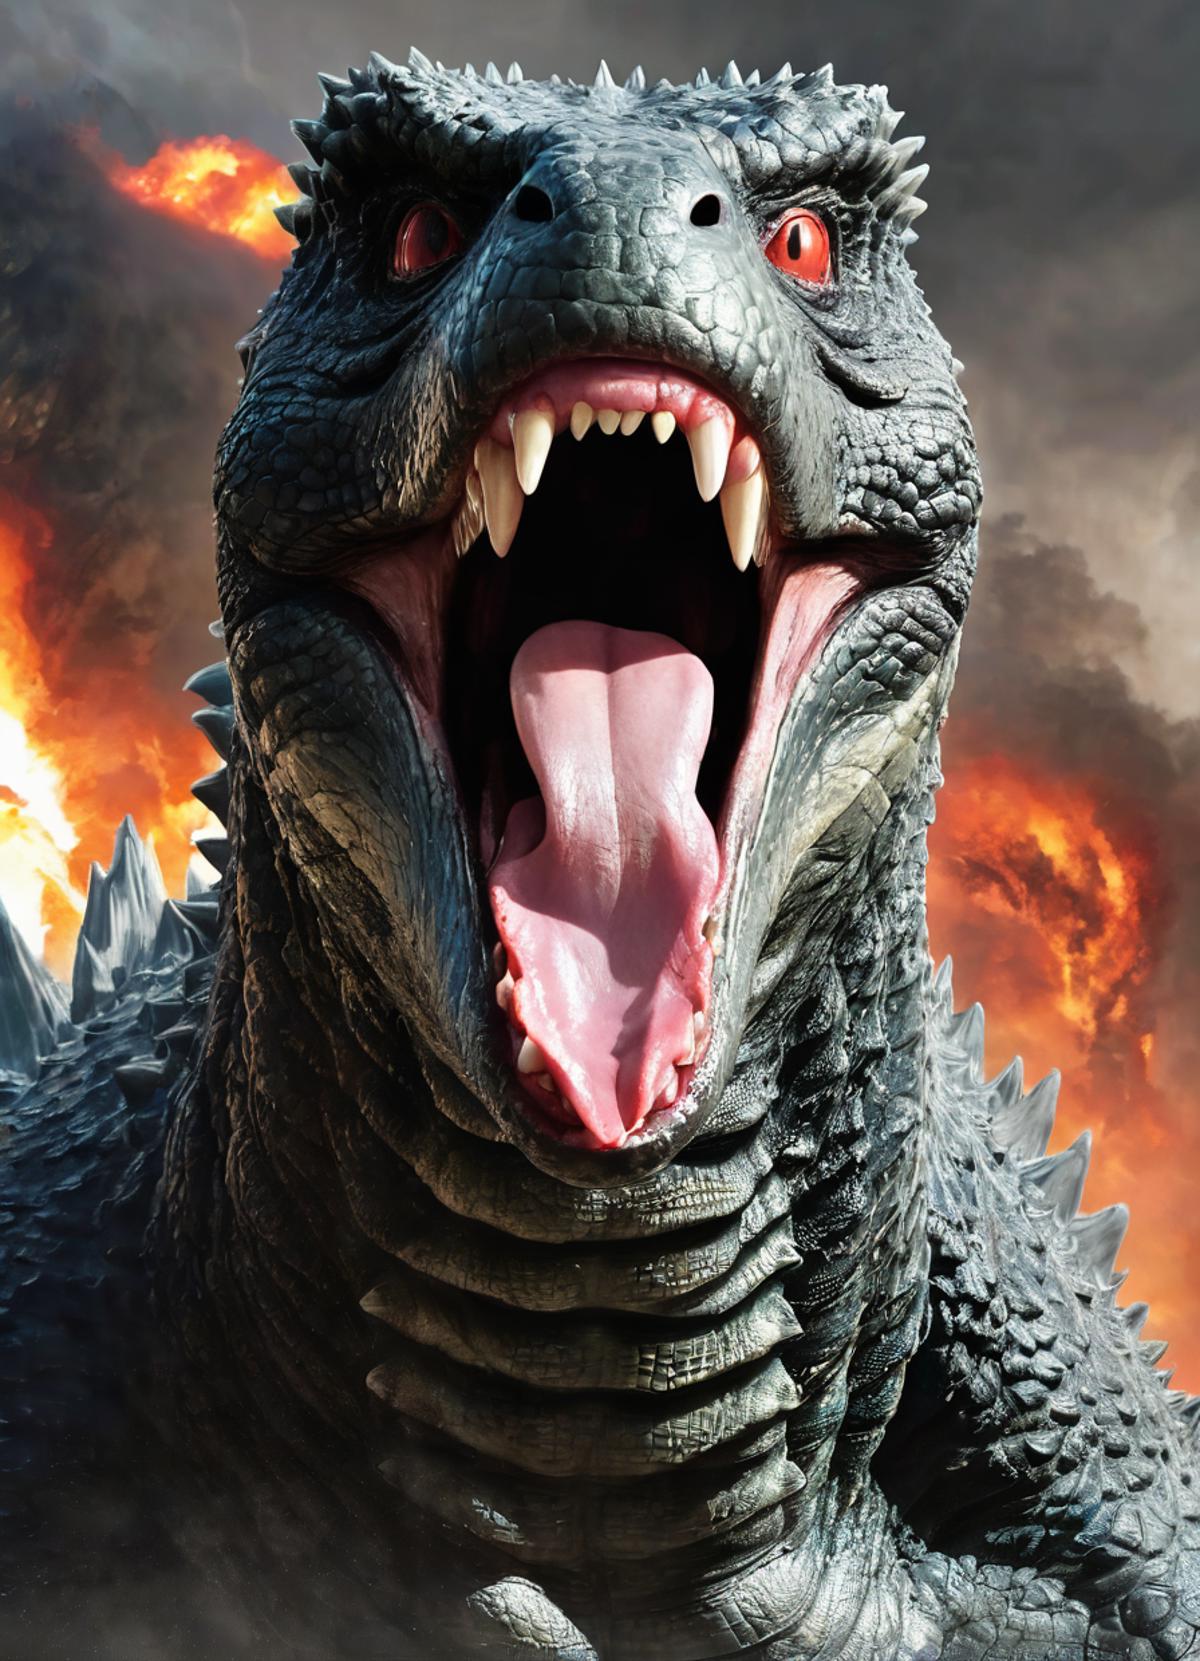 The Open Mouth of a Godzilla-like Monster with Red Eyes and Teeth, Displaying a Tongue, in Front of a Fire Background.